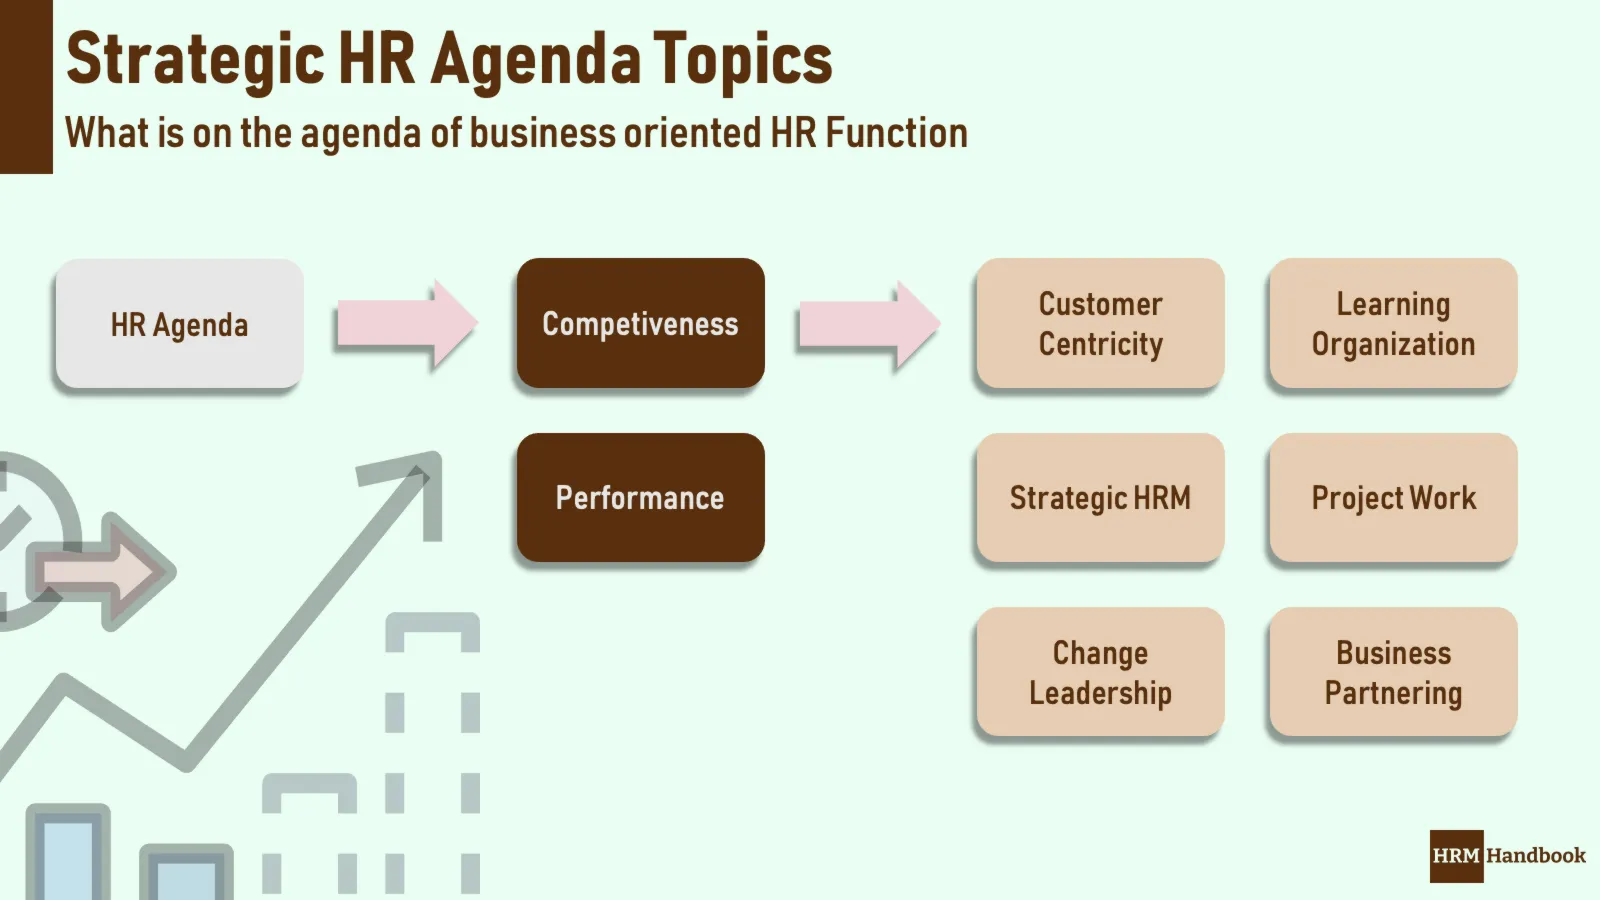 A strategic topics on HR Agenda to deliver an increase in Competitiveness and Performance